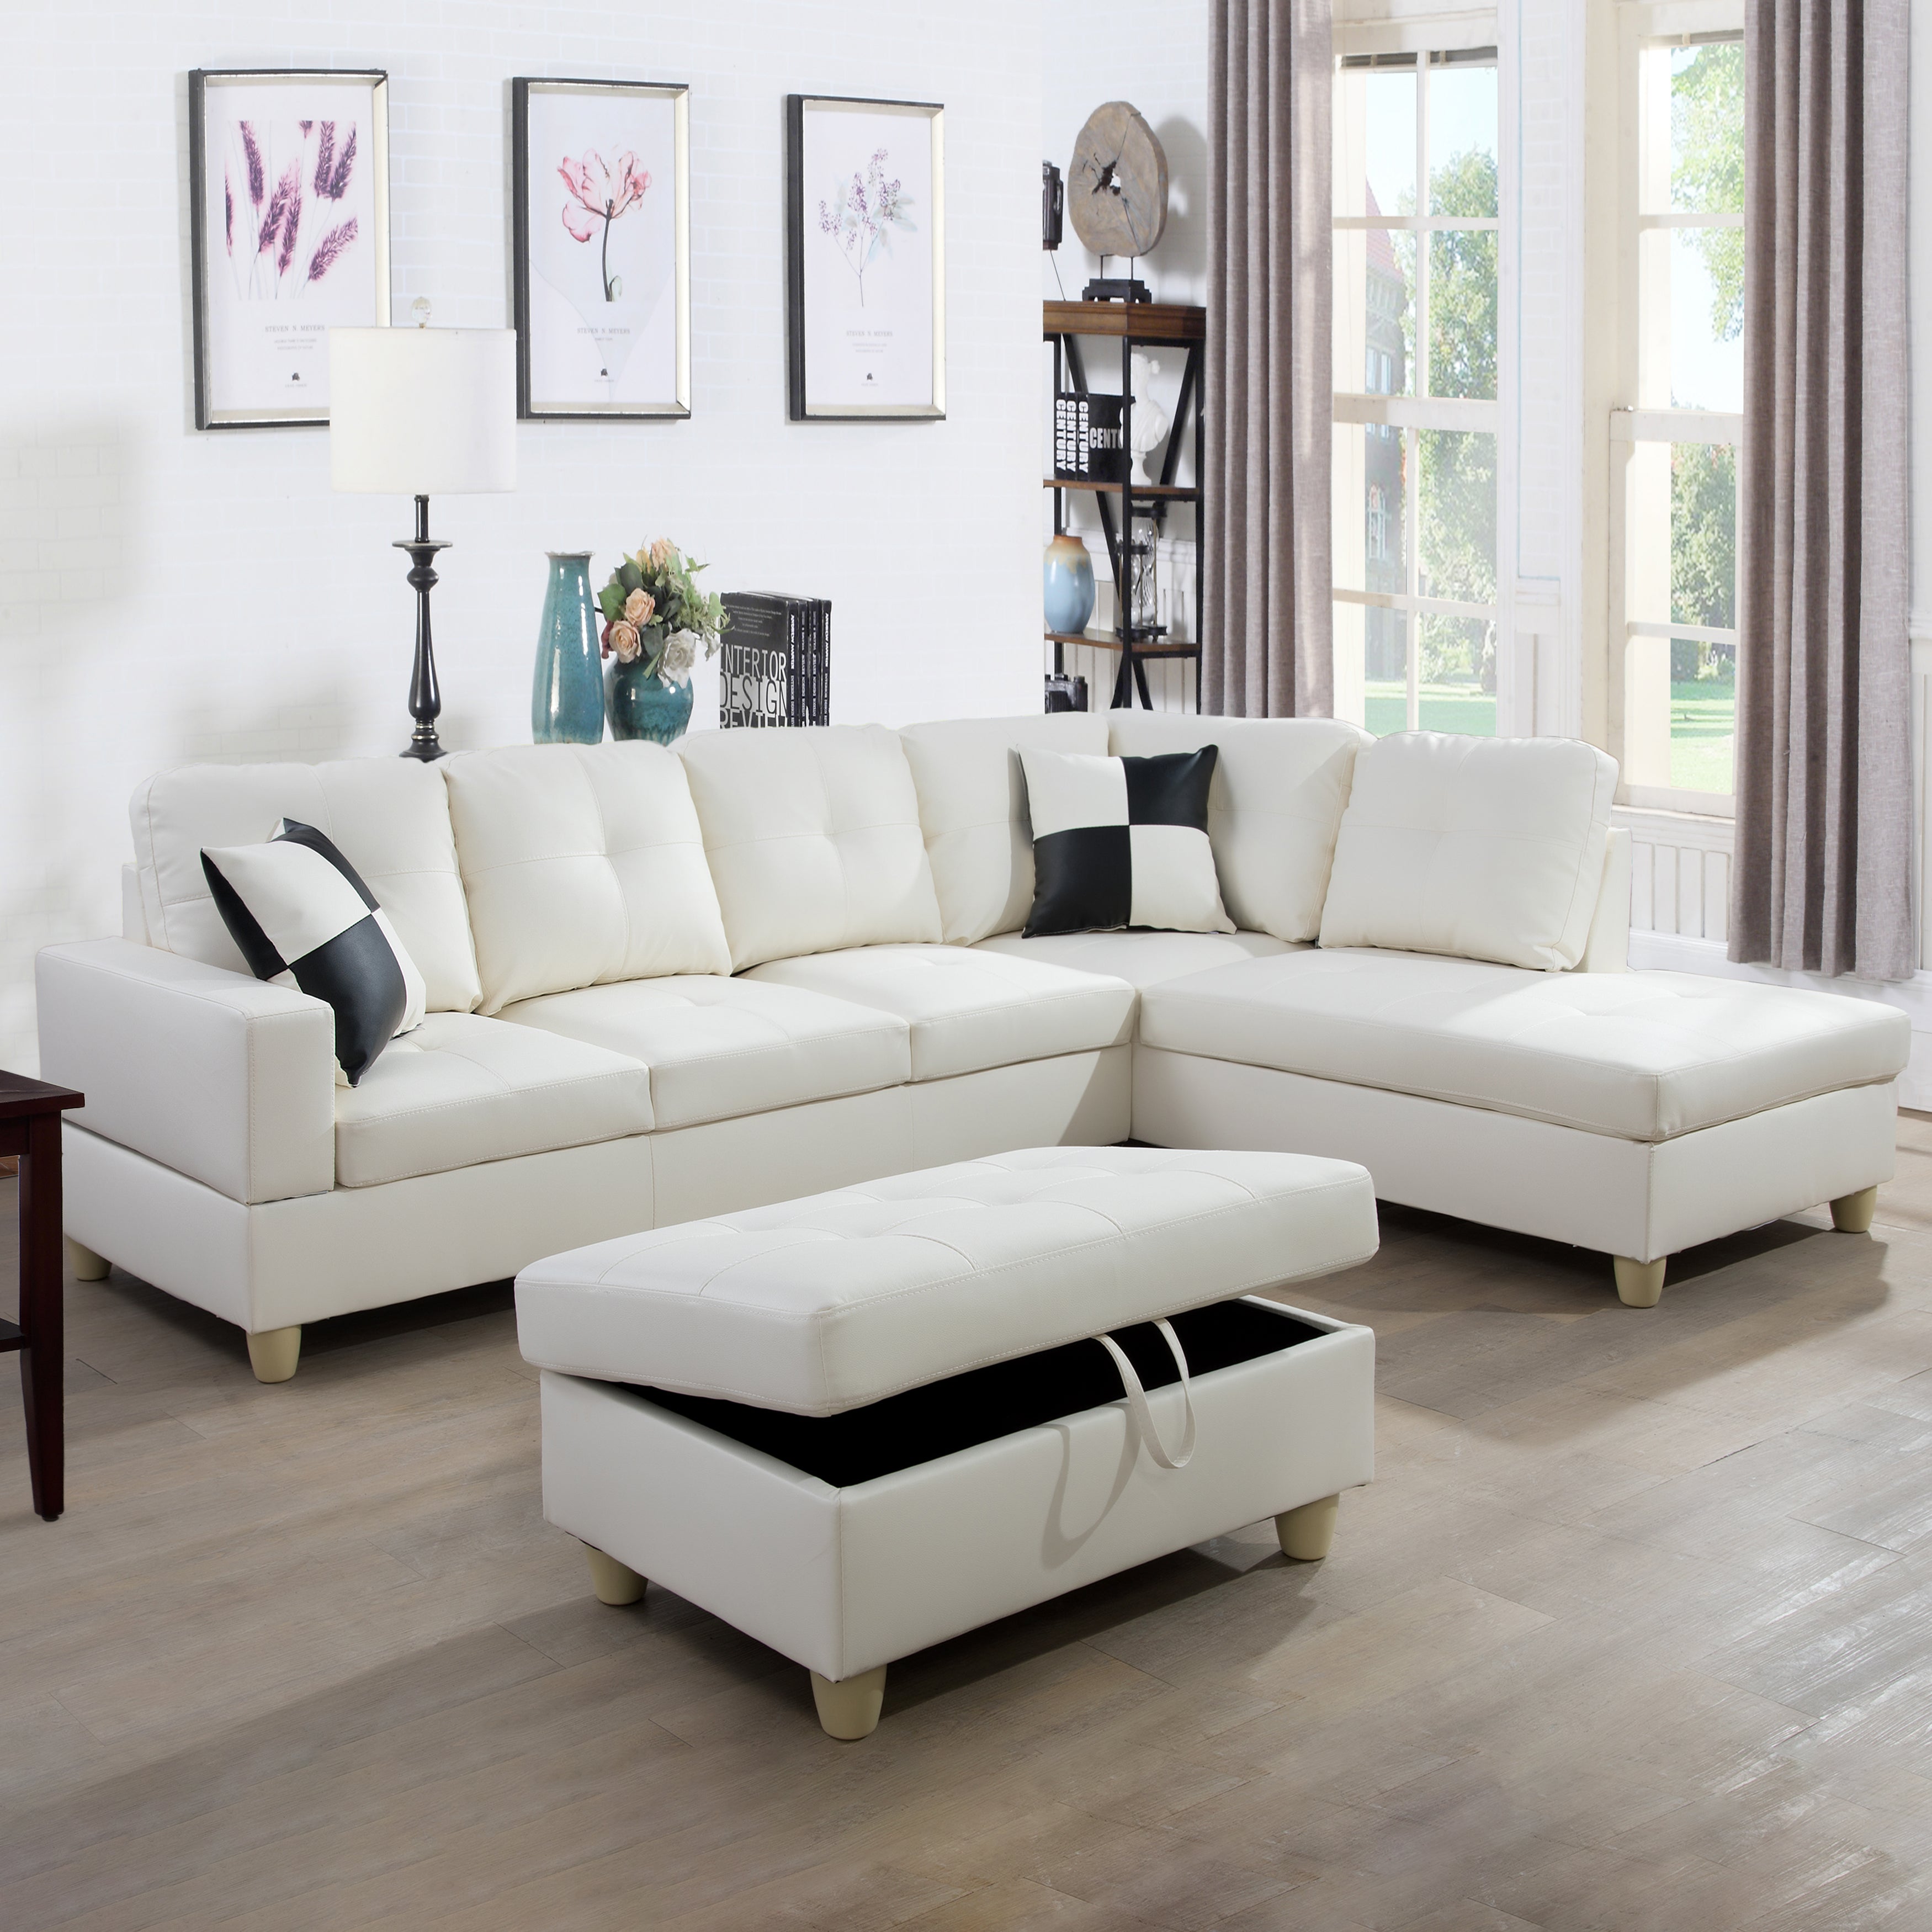 Ainehome White Faux Leather 3-Piece Couch Living Room Sofa Set